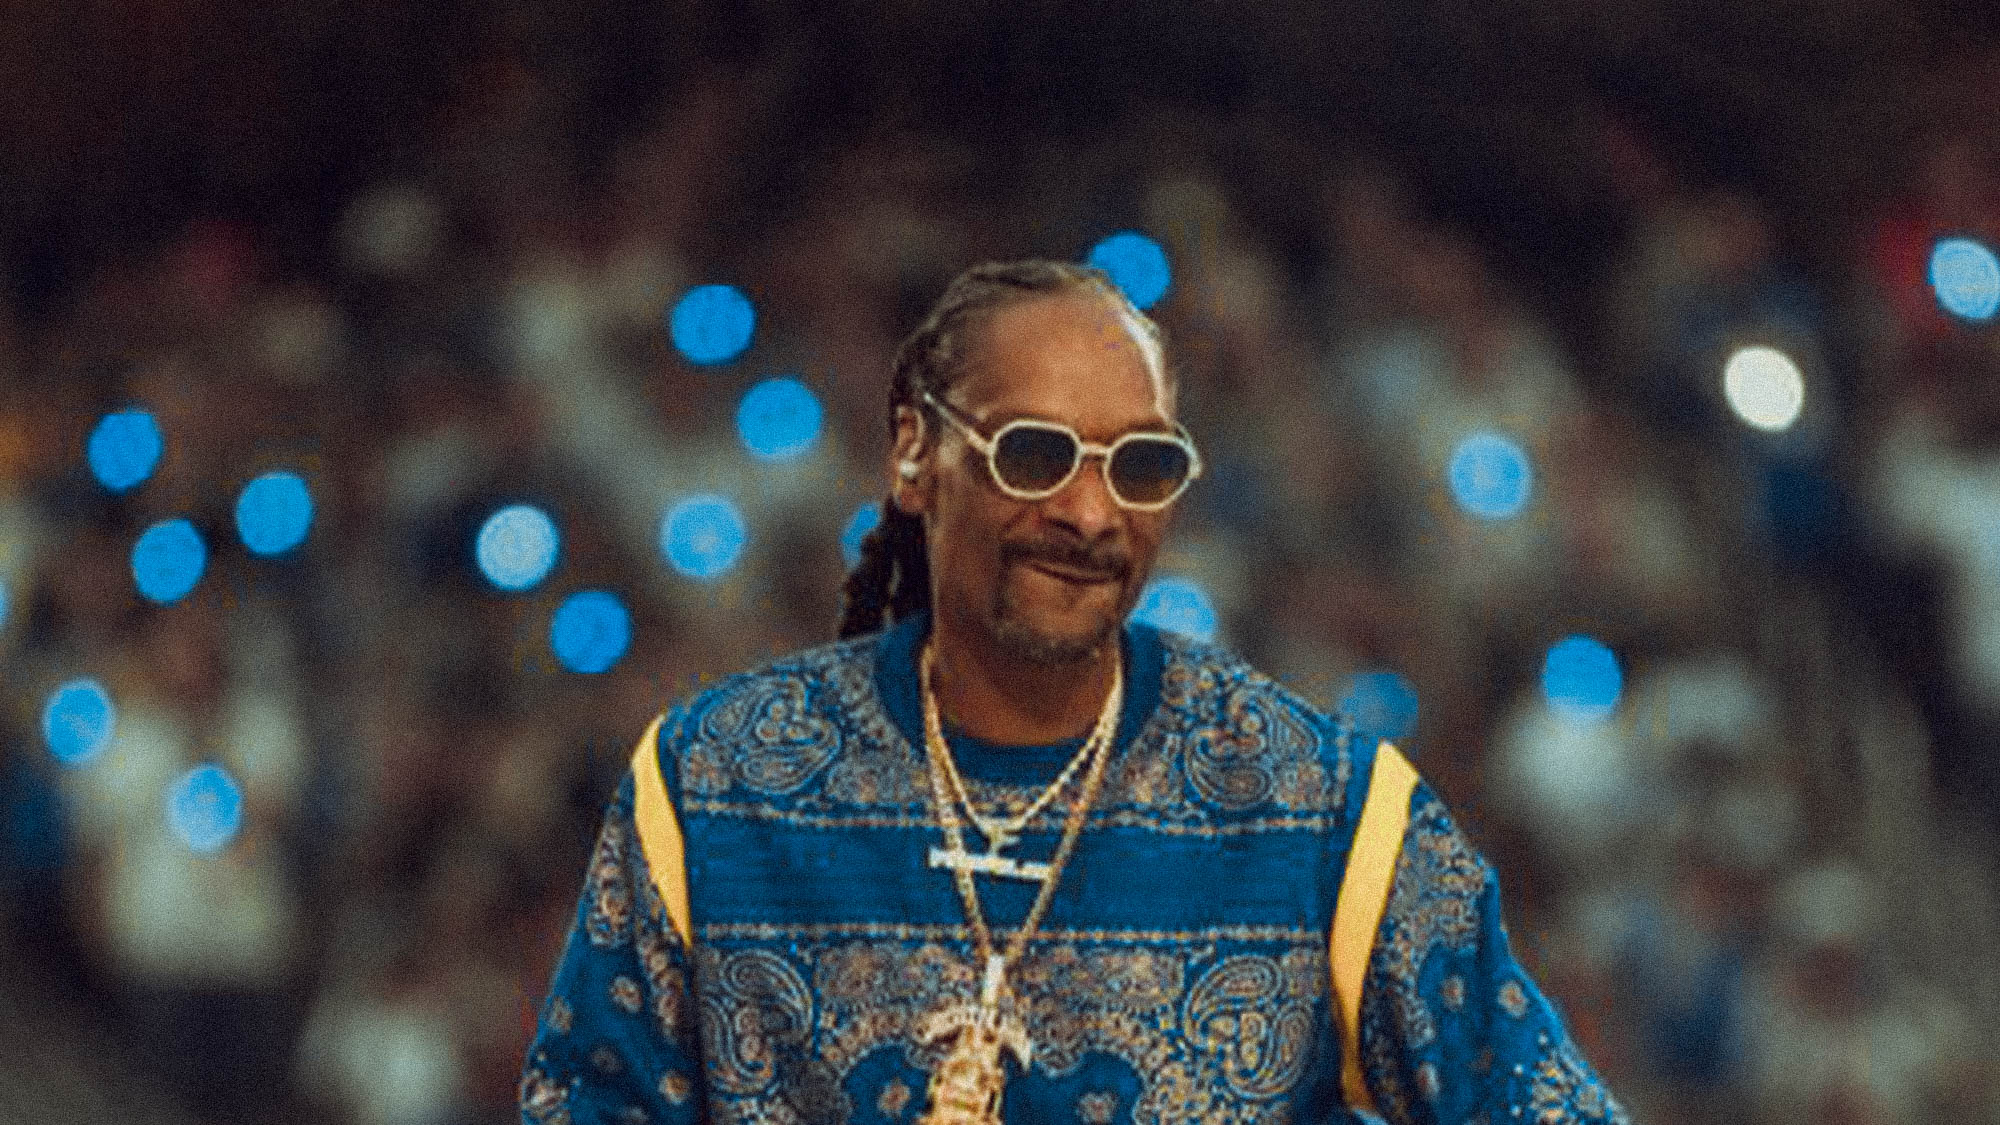 Snoop Dogg crip walk was the highlight during the Super Bowl LVI halftime